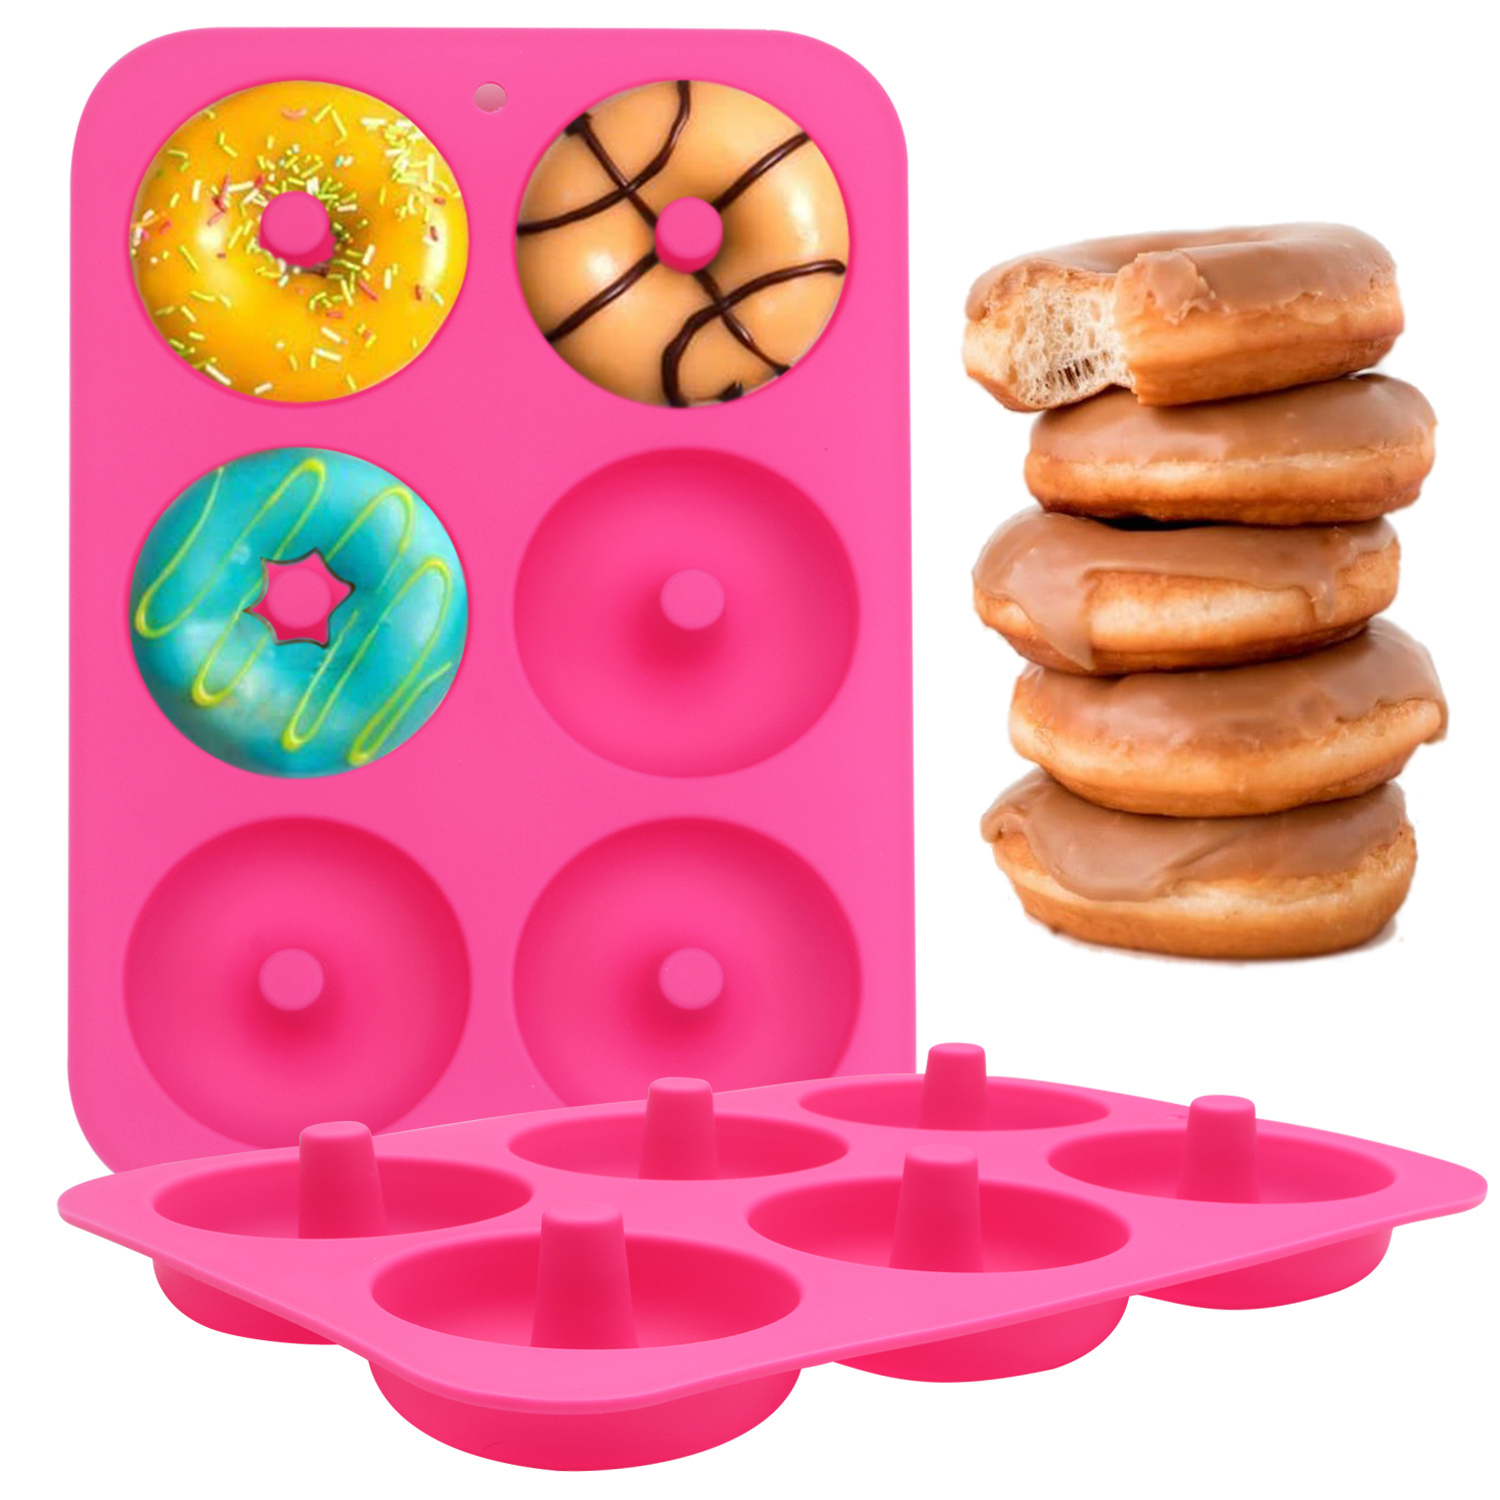 Silicone Donut Pan 2 Pcak Non-Stick Mold for 4 Full-Size Donuts Bagels and More，Mini Donut Pan for Baking 